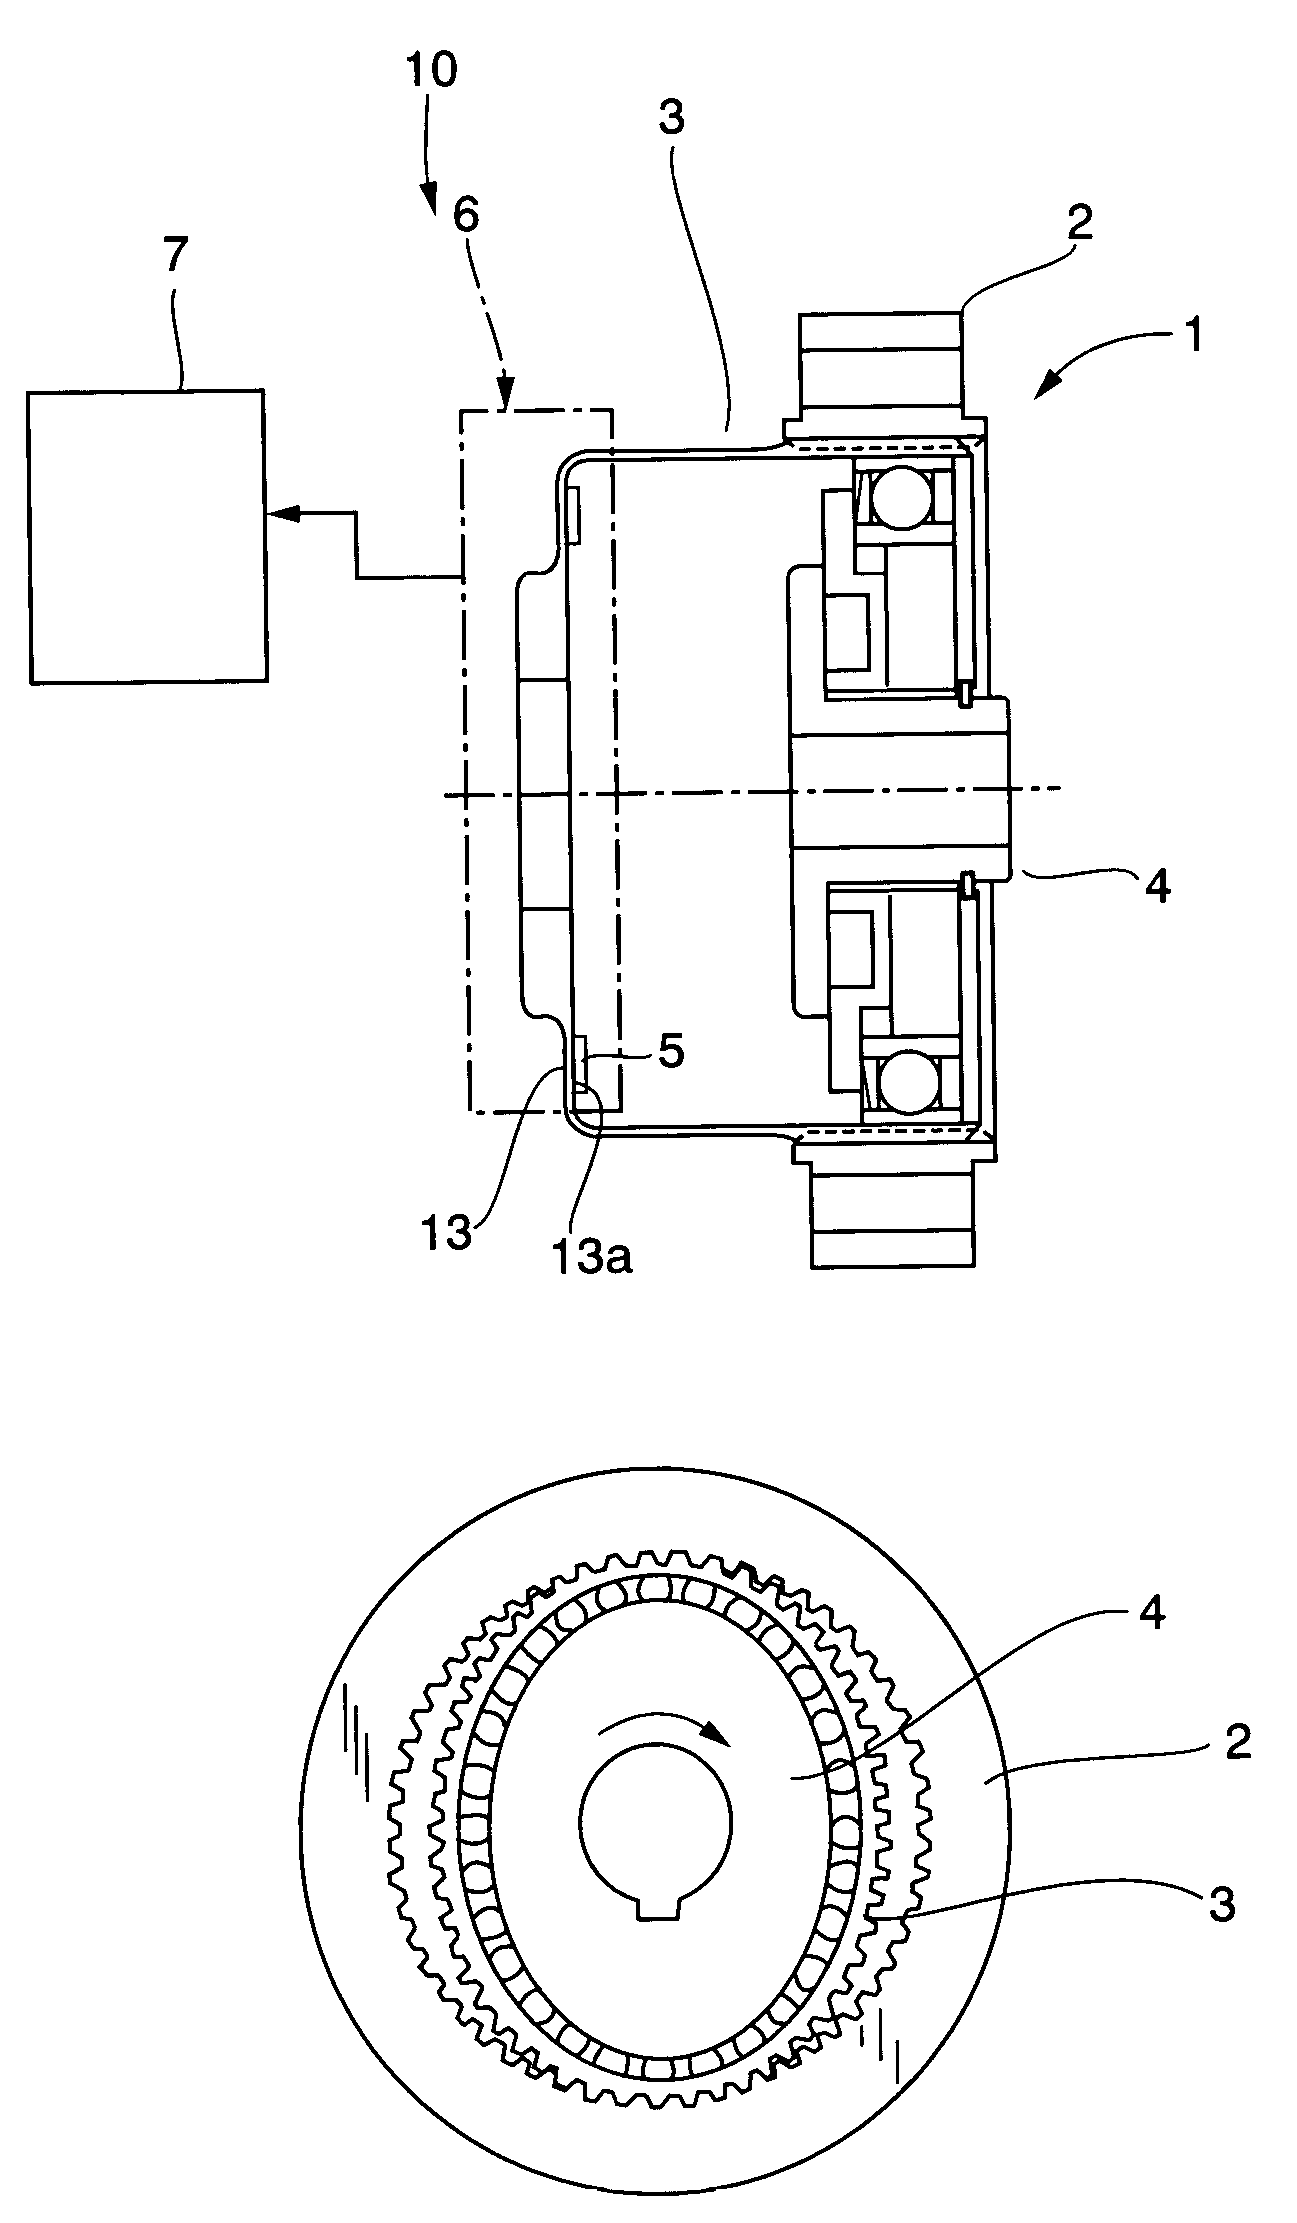 Torque detection device for wave gearing